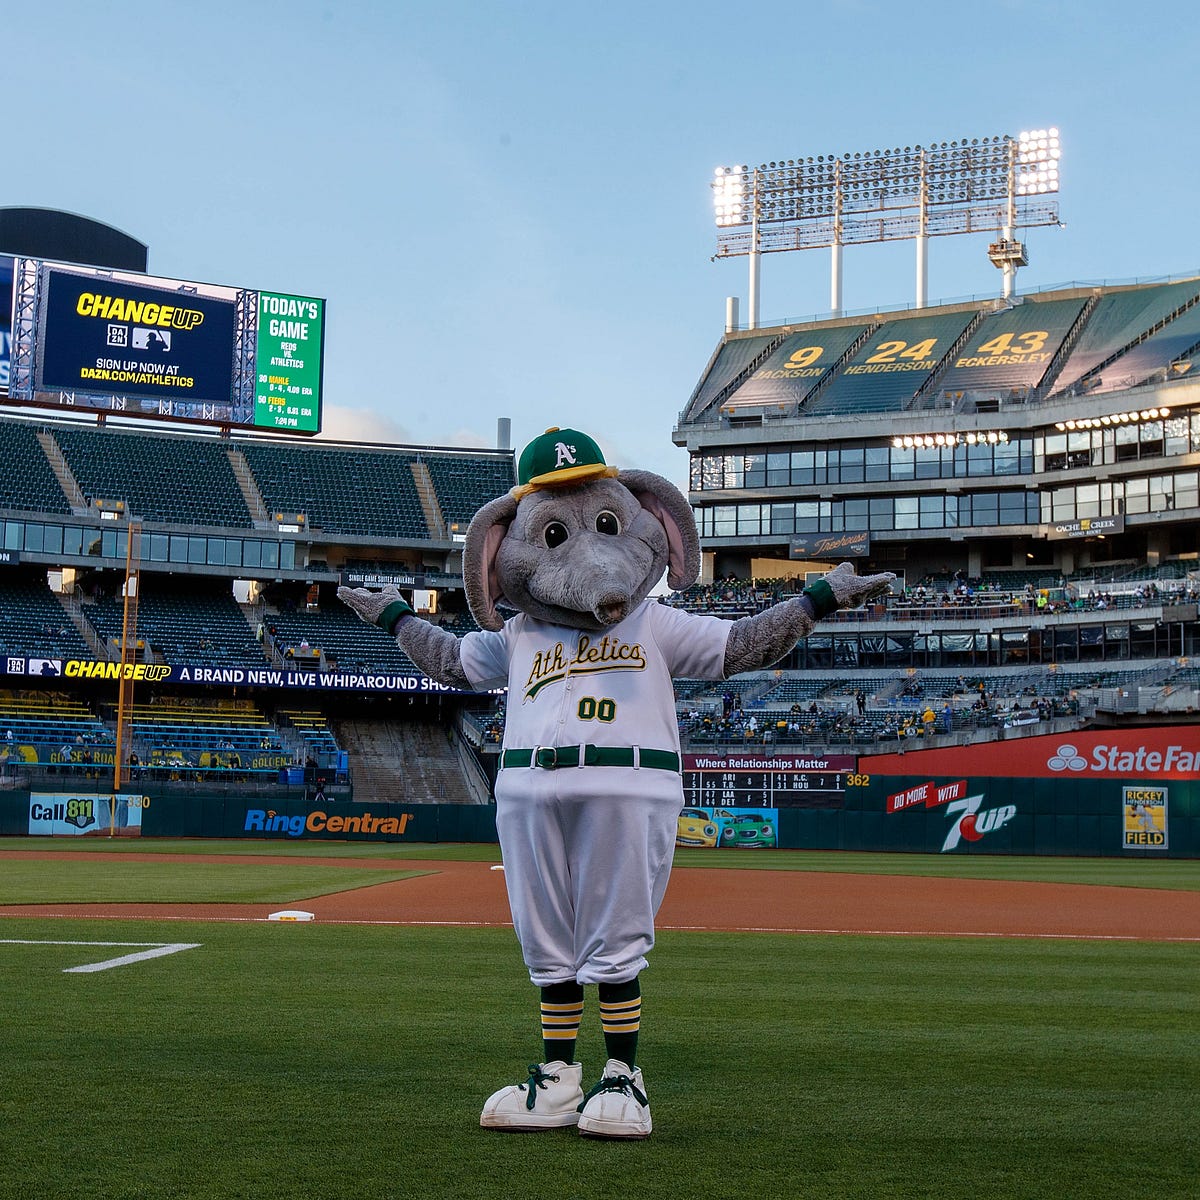 ALDS 2013: Step-by-Step Guide for Oakland A's to Win the Series